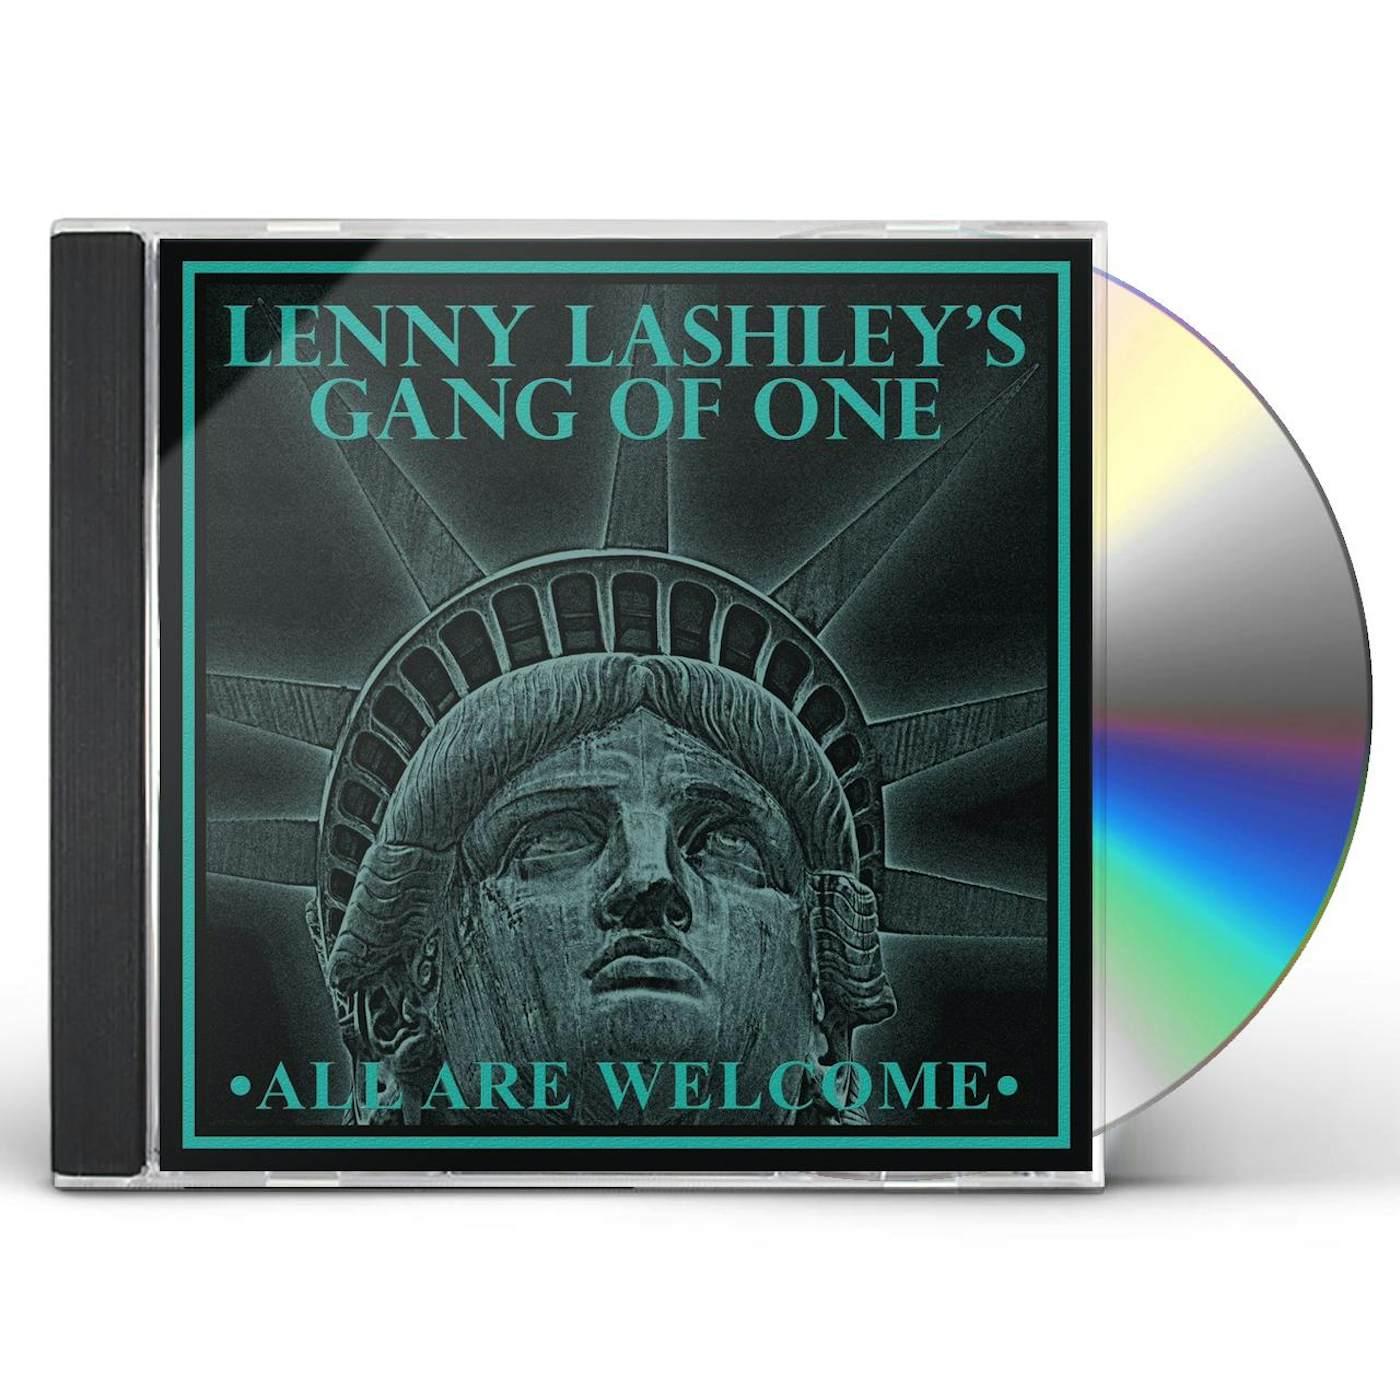 Lenny Lashley's Gang of One ALL ARE WELCOME CD